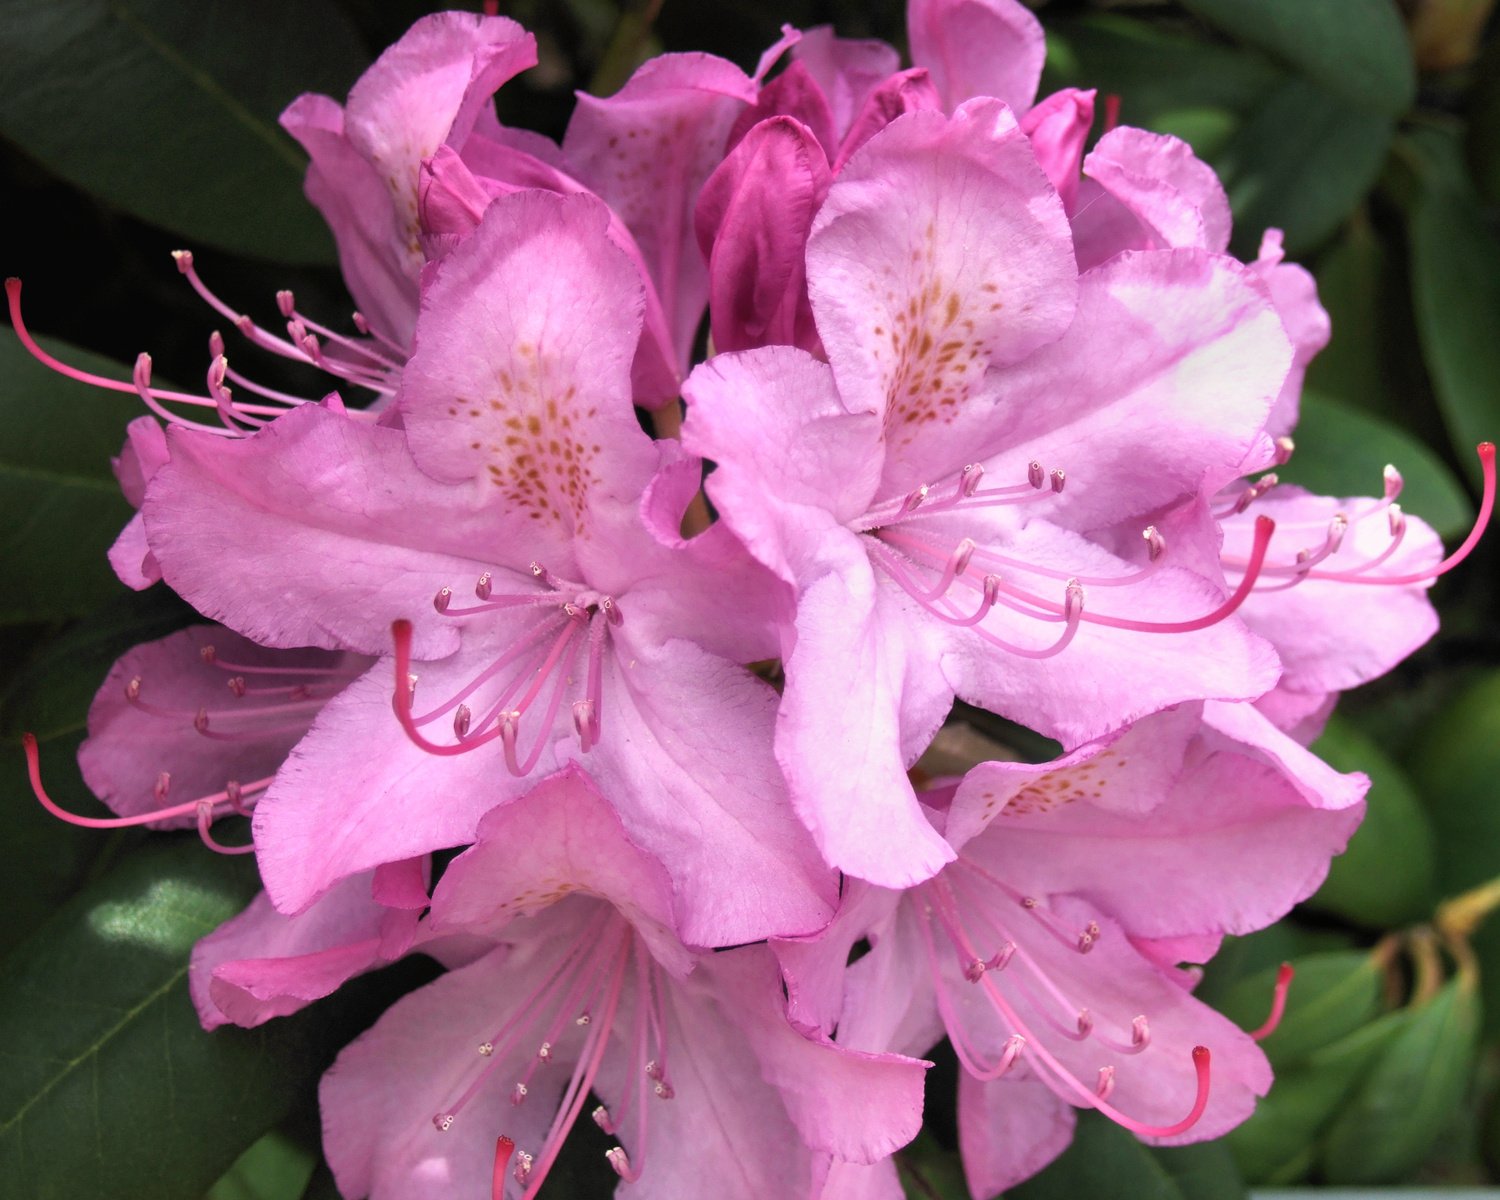 a close up view of pink flowers with green leaves